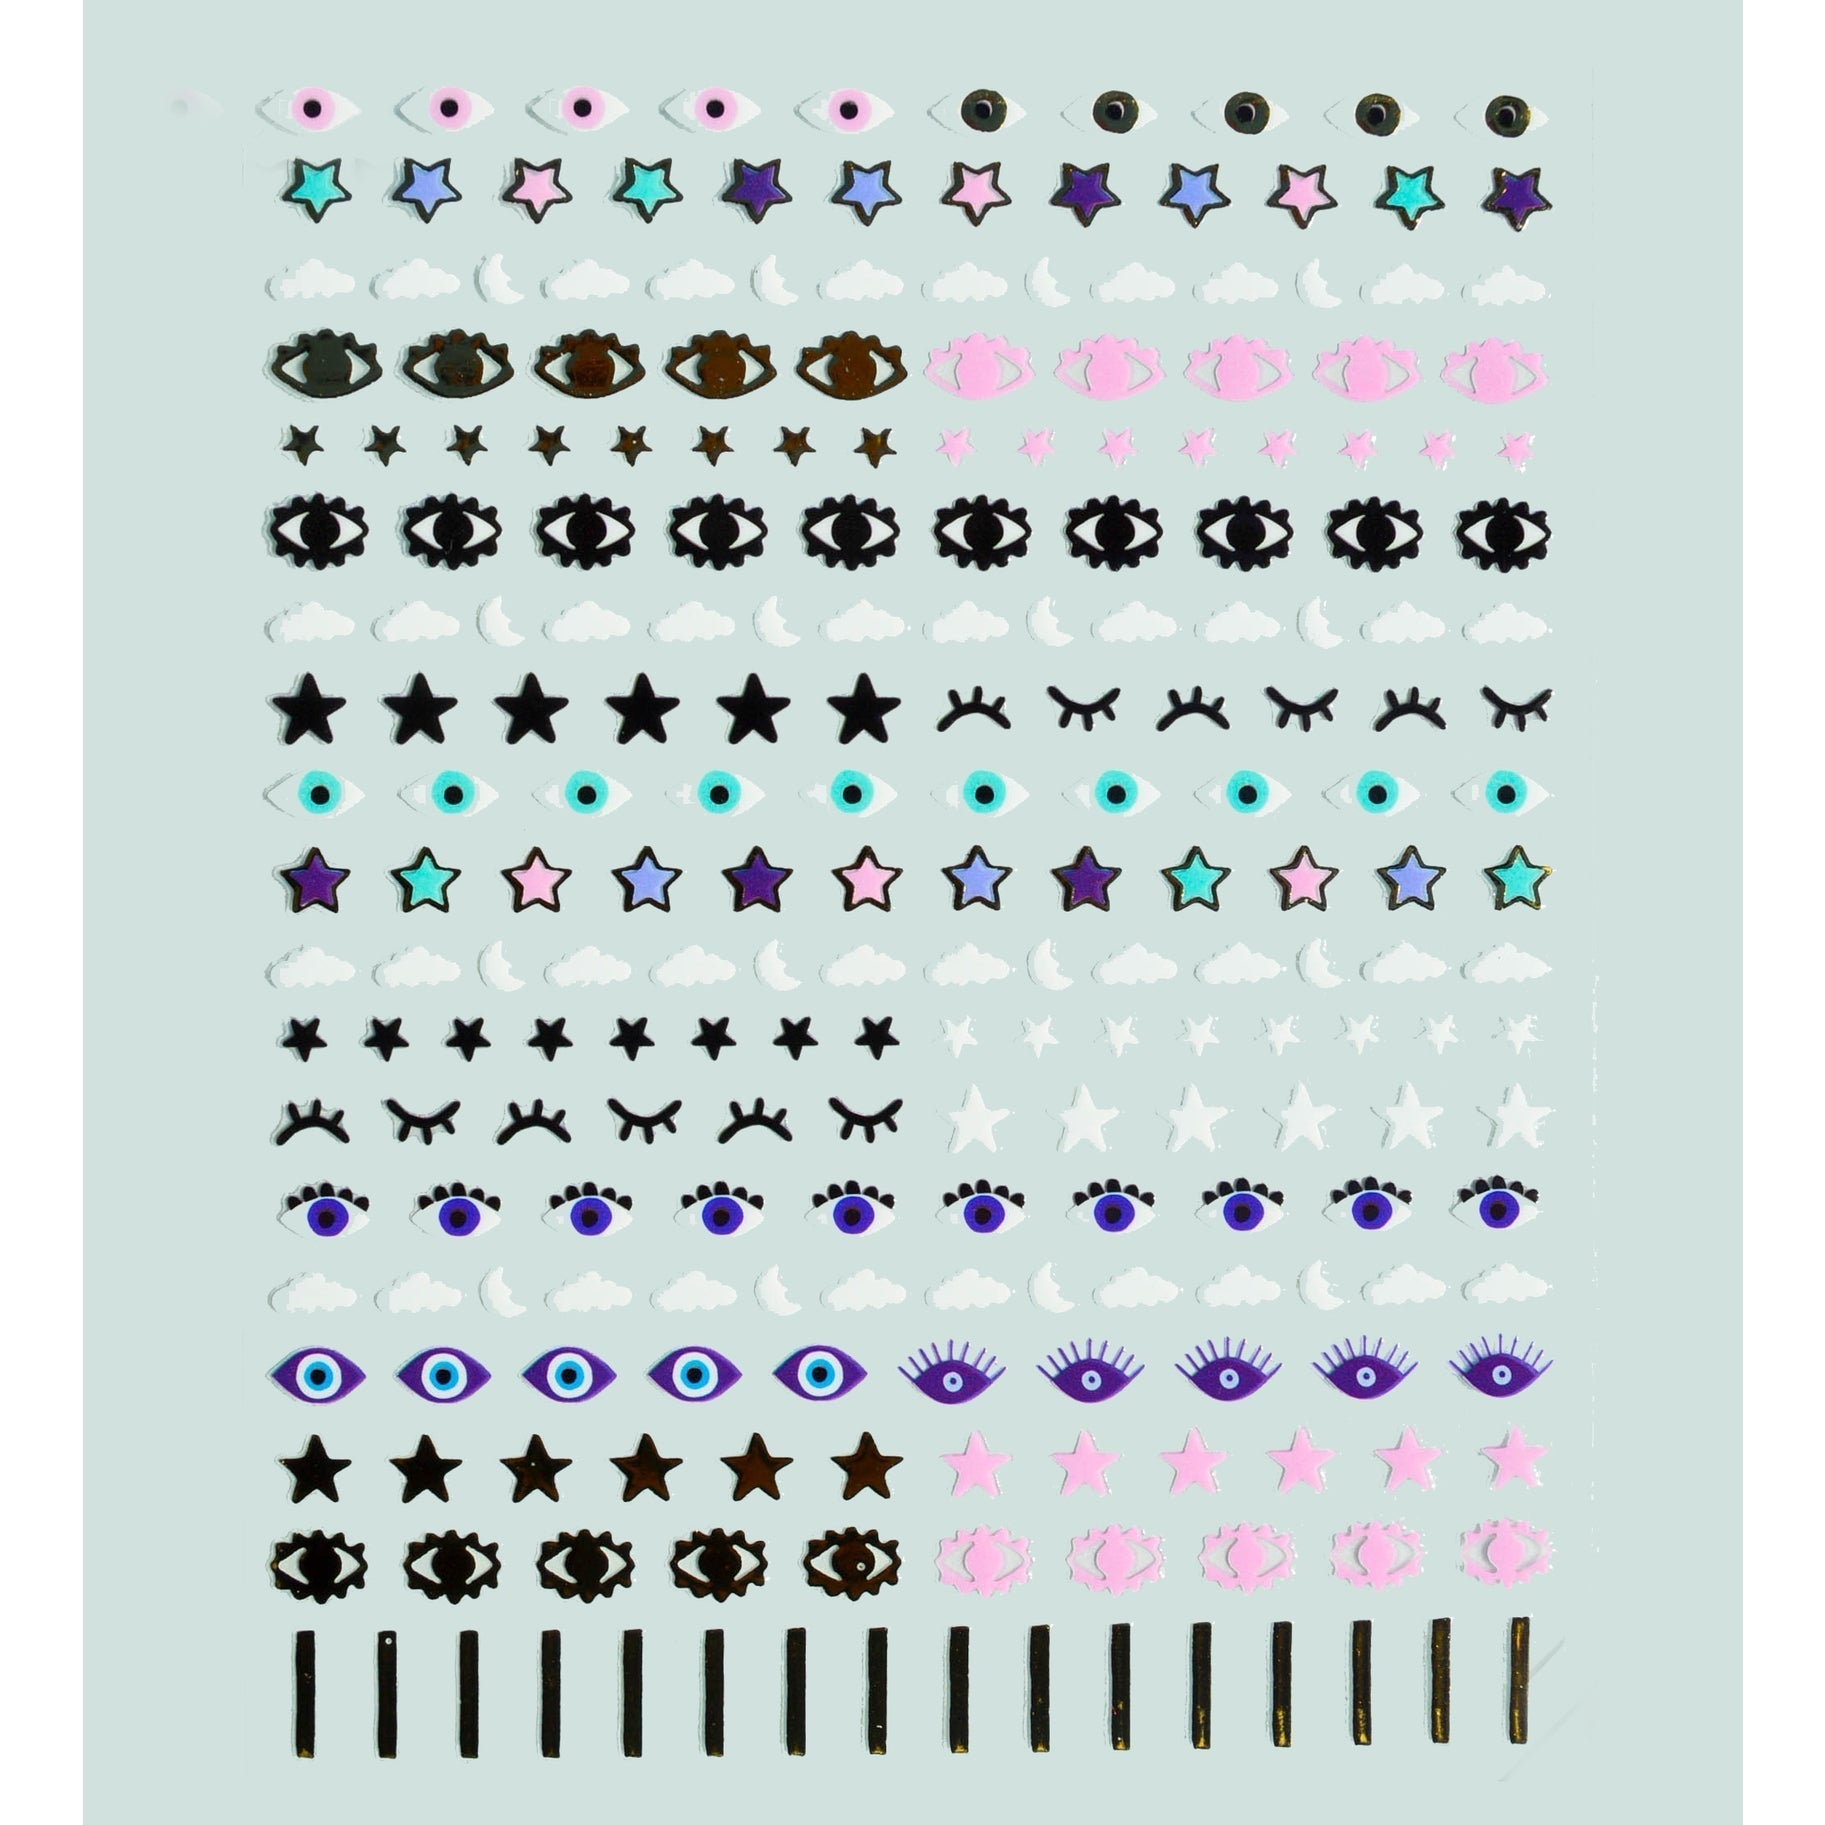 Stars In Your Eyes Nail Art Sticker Set | Vegan & Cruelty-Free | Use on Polish, Gel, or Natural Nails